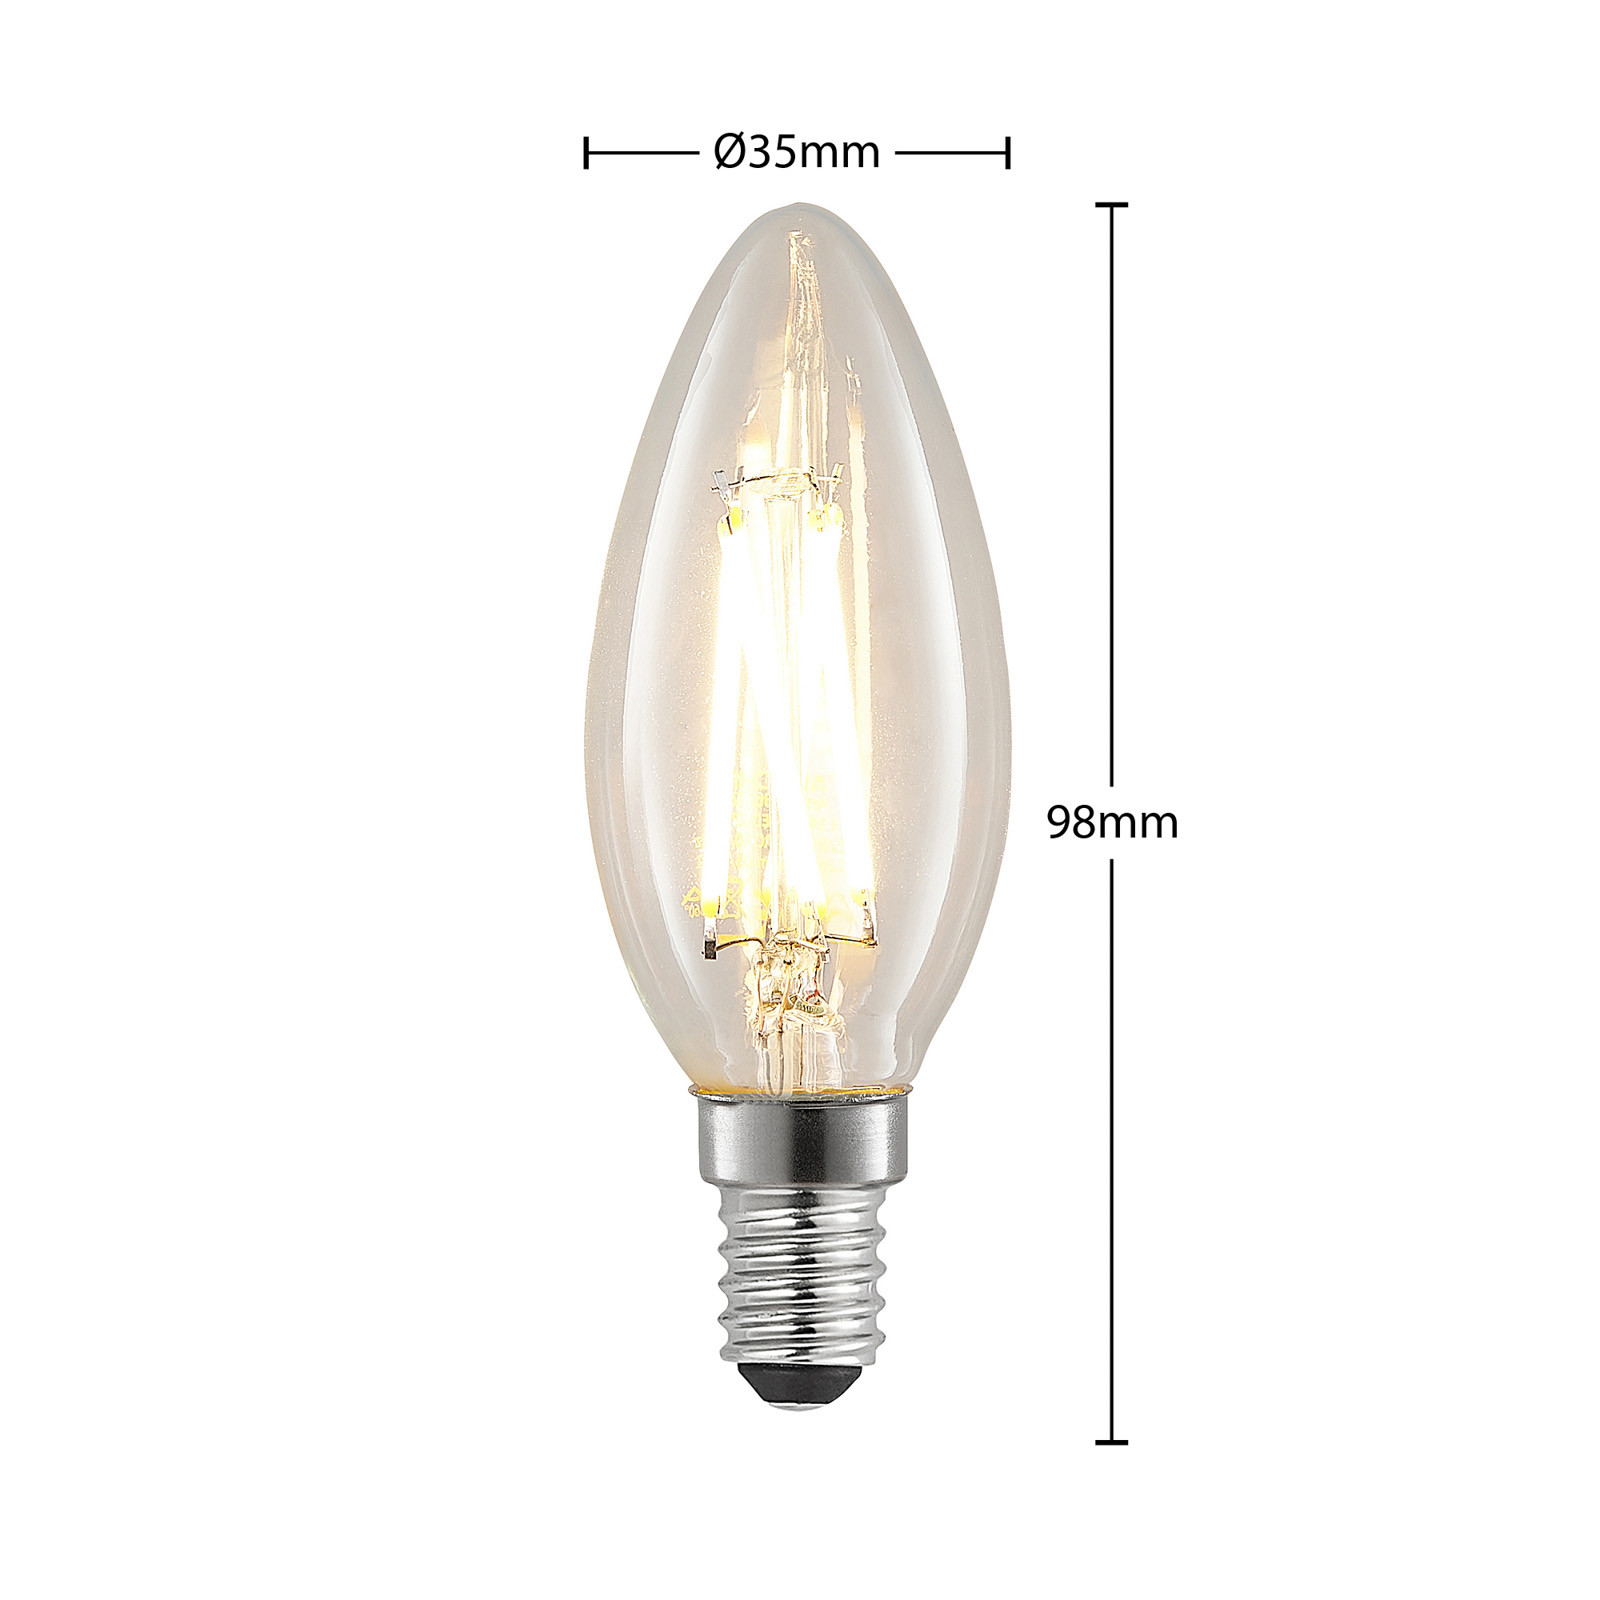 LED bulb E14 4 W 2,700 K candle filament dimmable